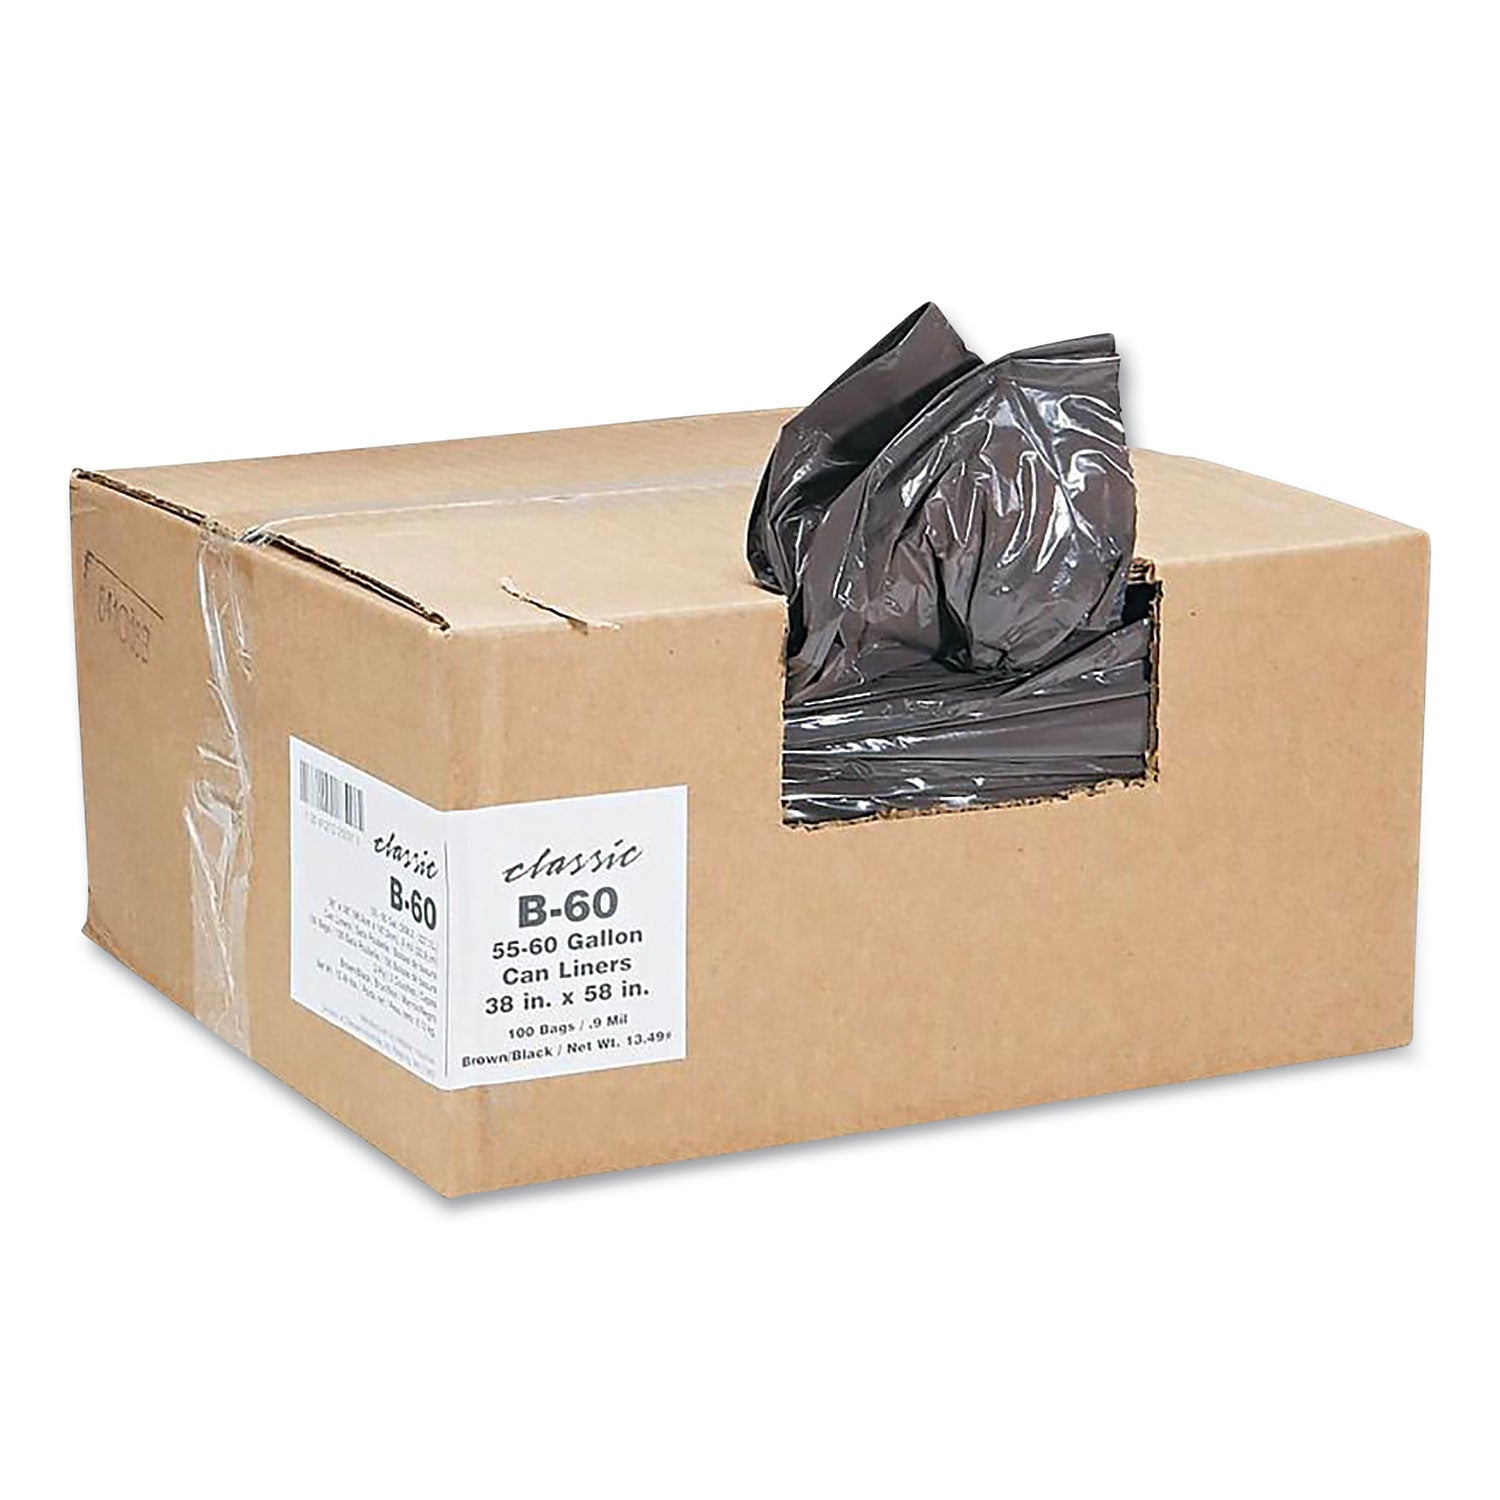 linear-low-density-can-liners-55-to-60-gal-09-mil-38-x-58-black-10-bags-roll-10-rolls-carton_wbib60790196 - 1